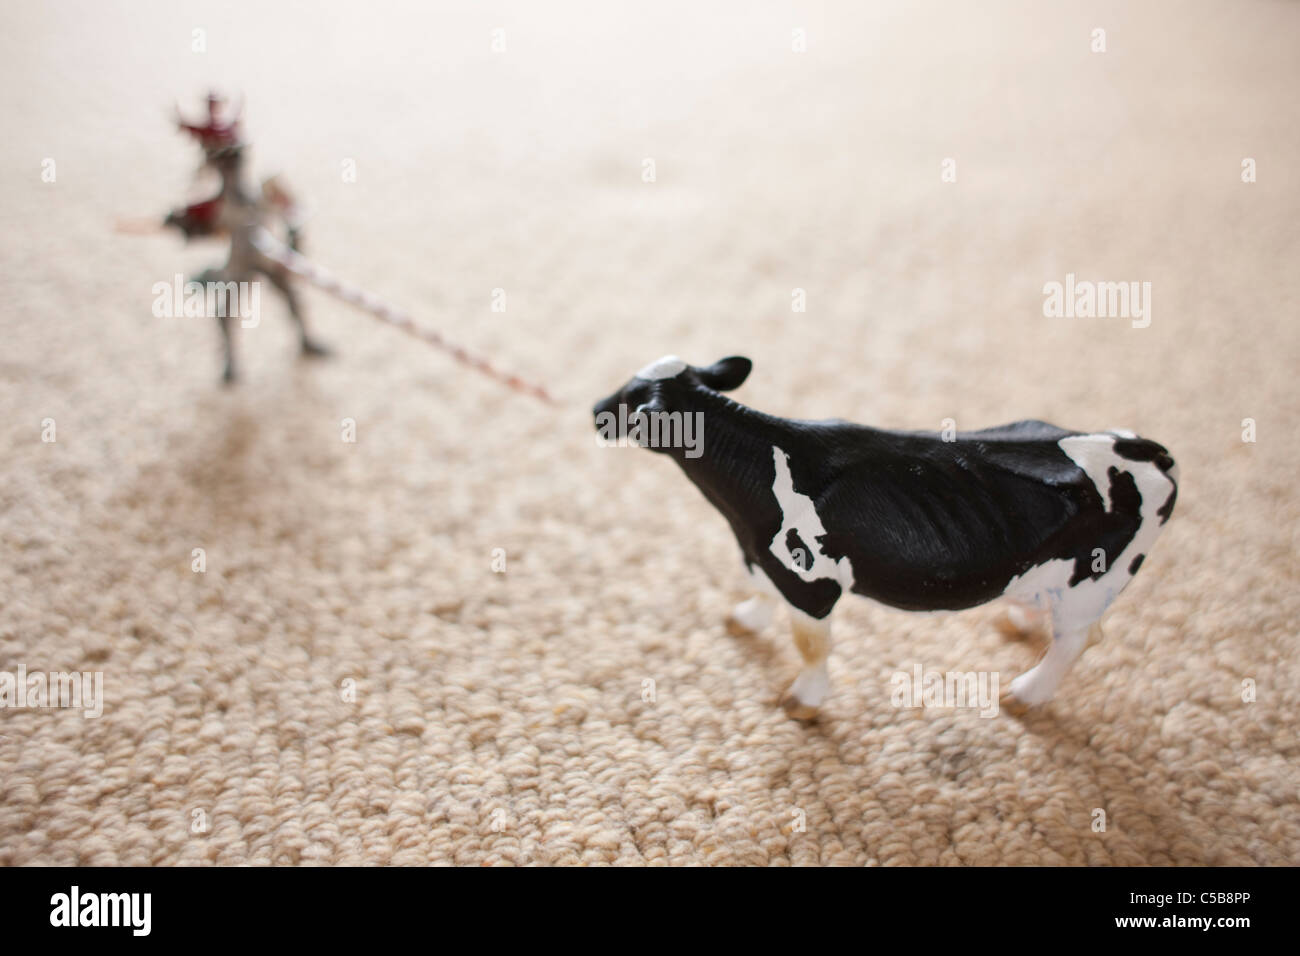 Toy cow and figure on carpet Stock Photo